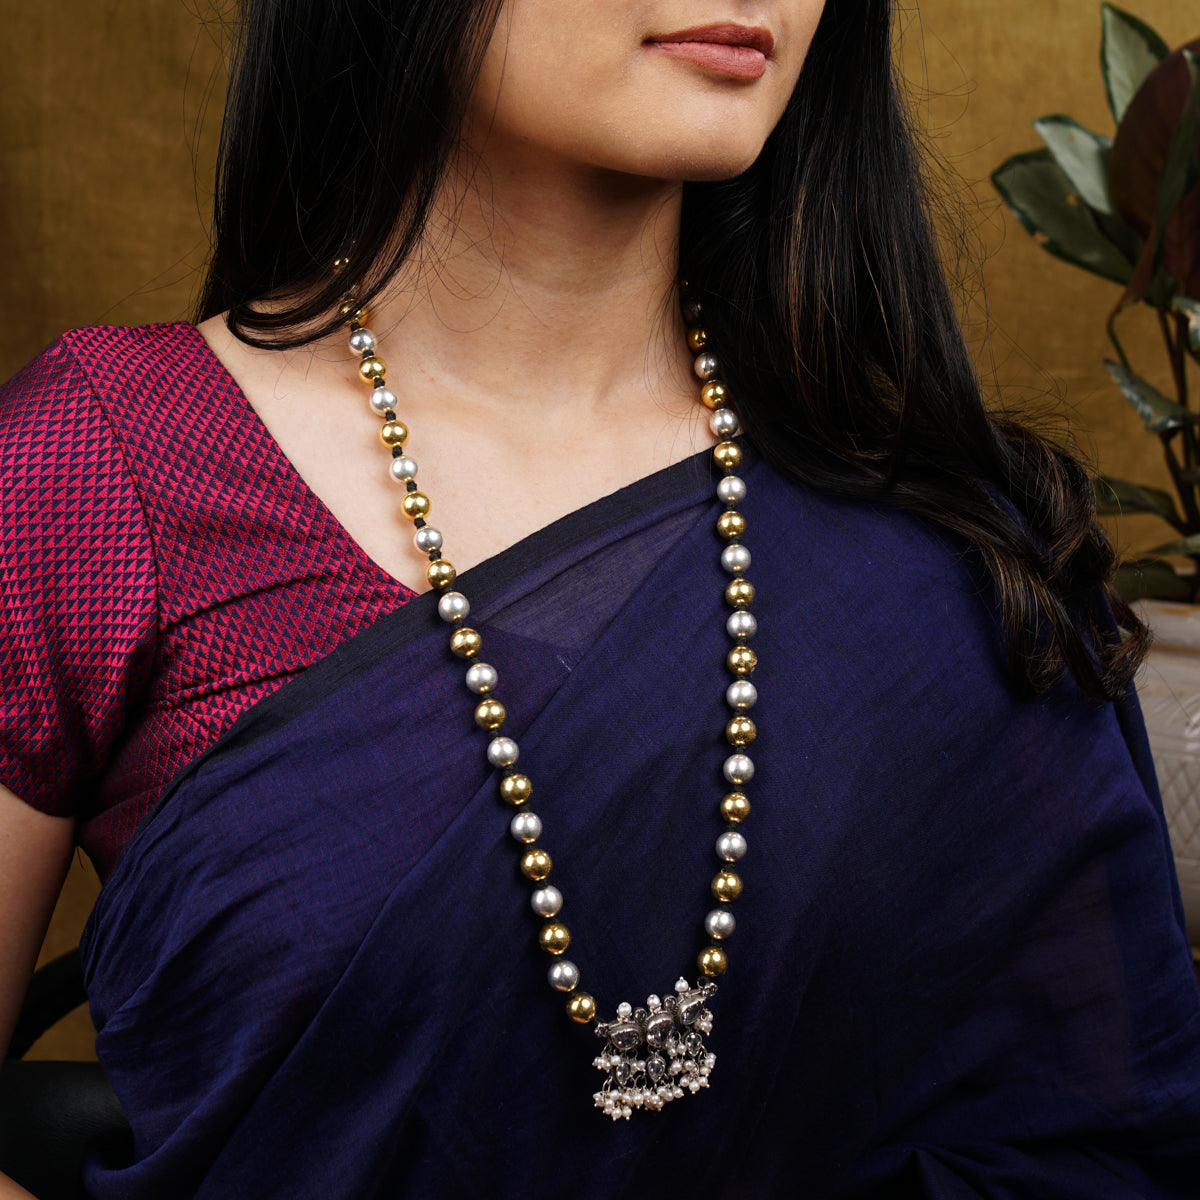 a woman wearing a necklace and a purple saree